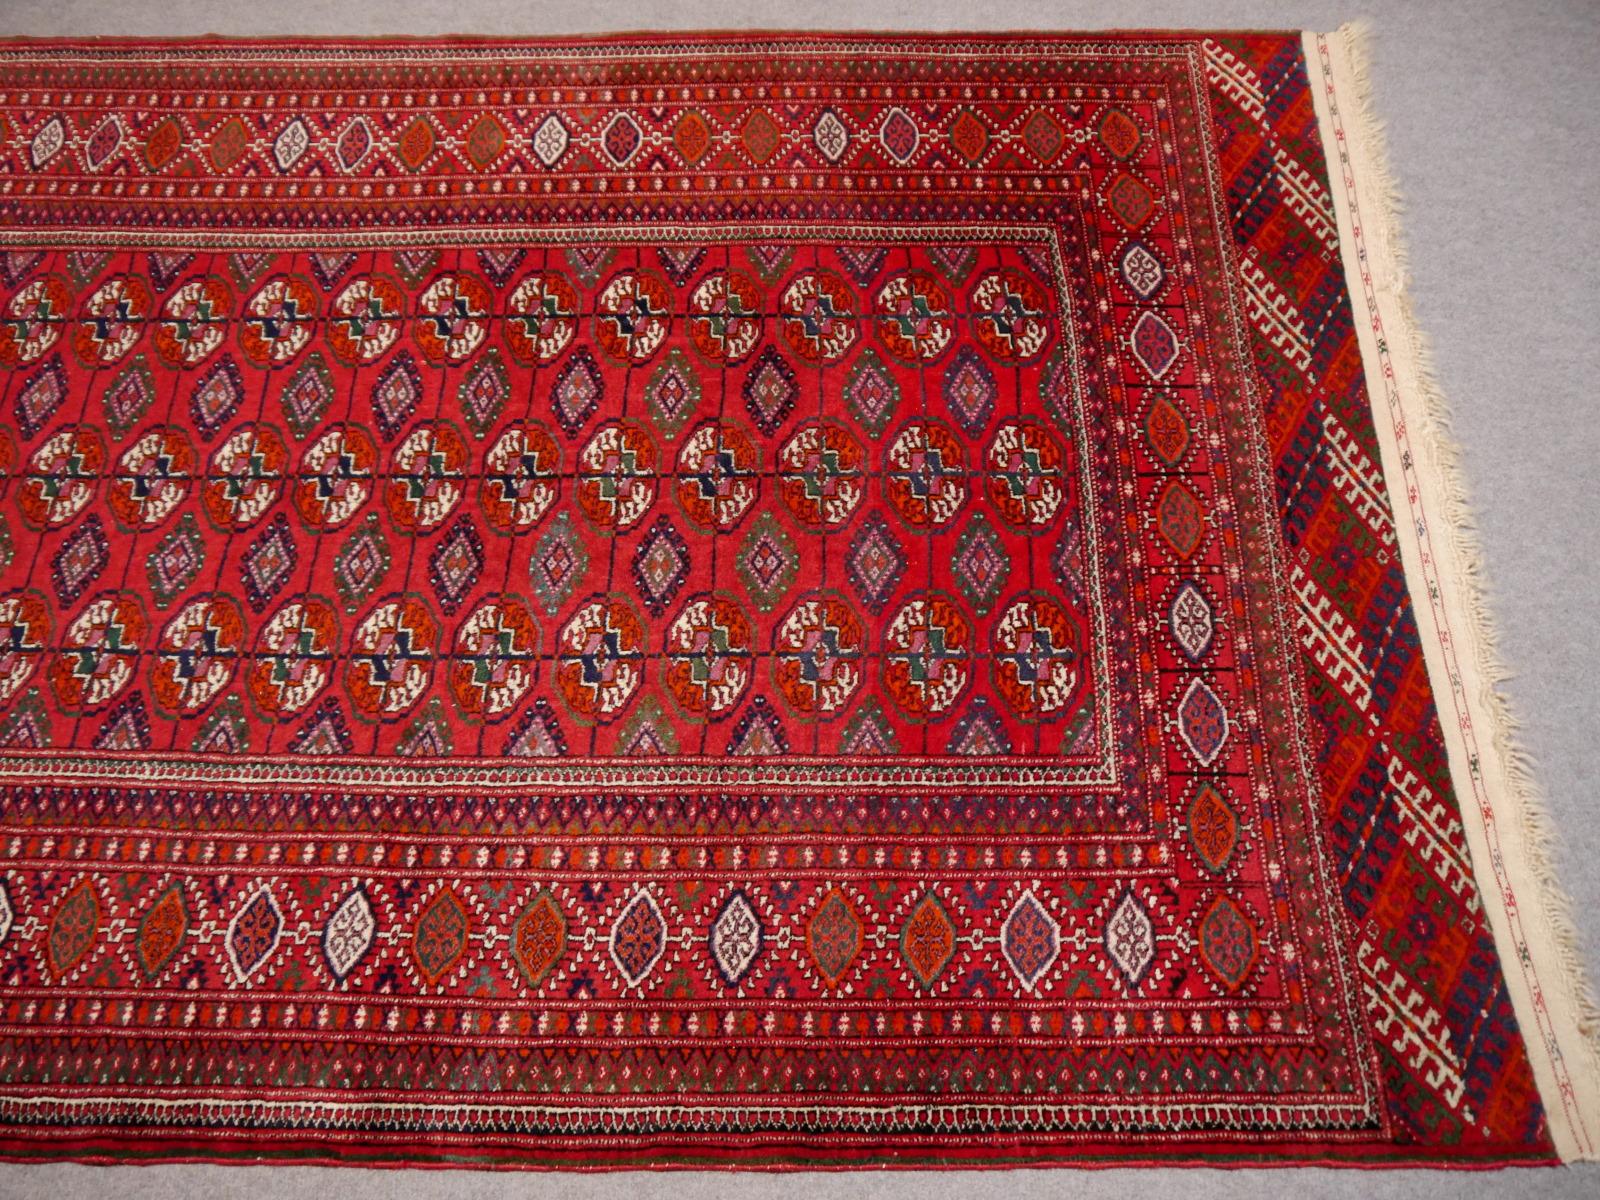 Fine hand knotted Russian Turkmen Bokhara rug or Turkmen rug Midcentury

Beautiful antique tribal Turkmen carpet in great condition. These carpets are named 